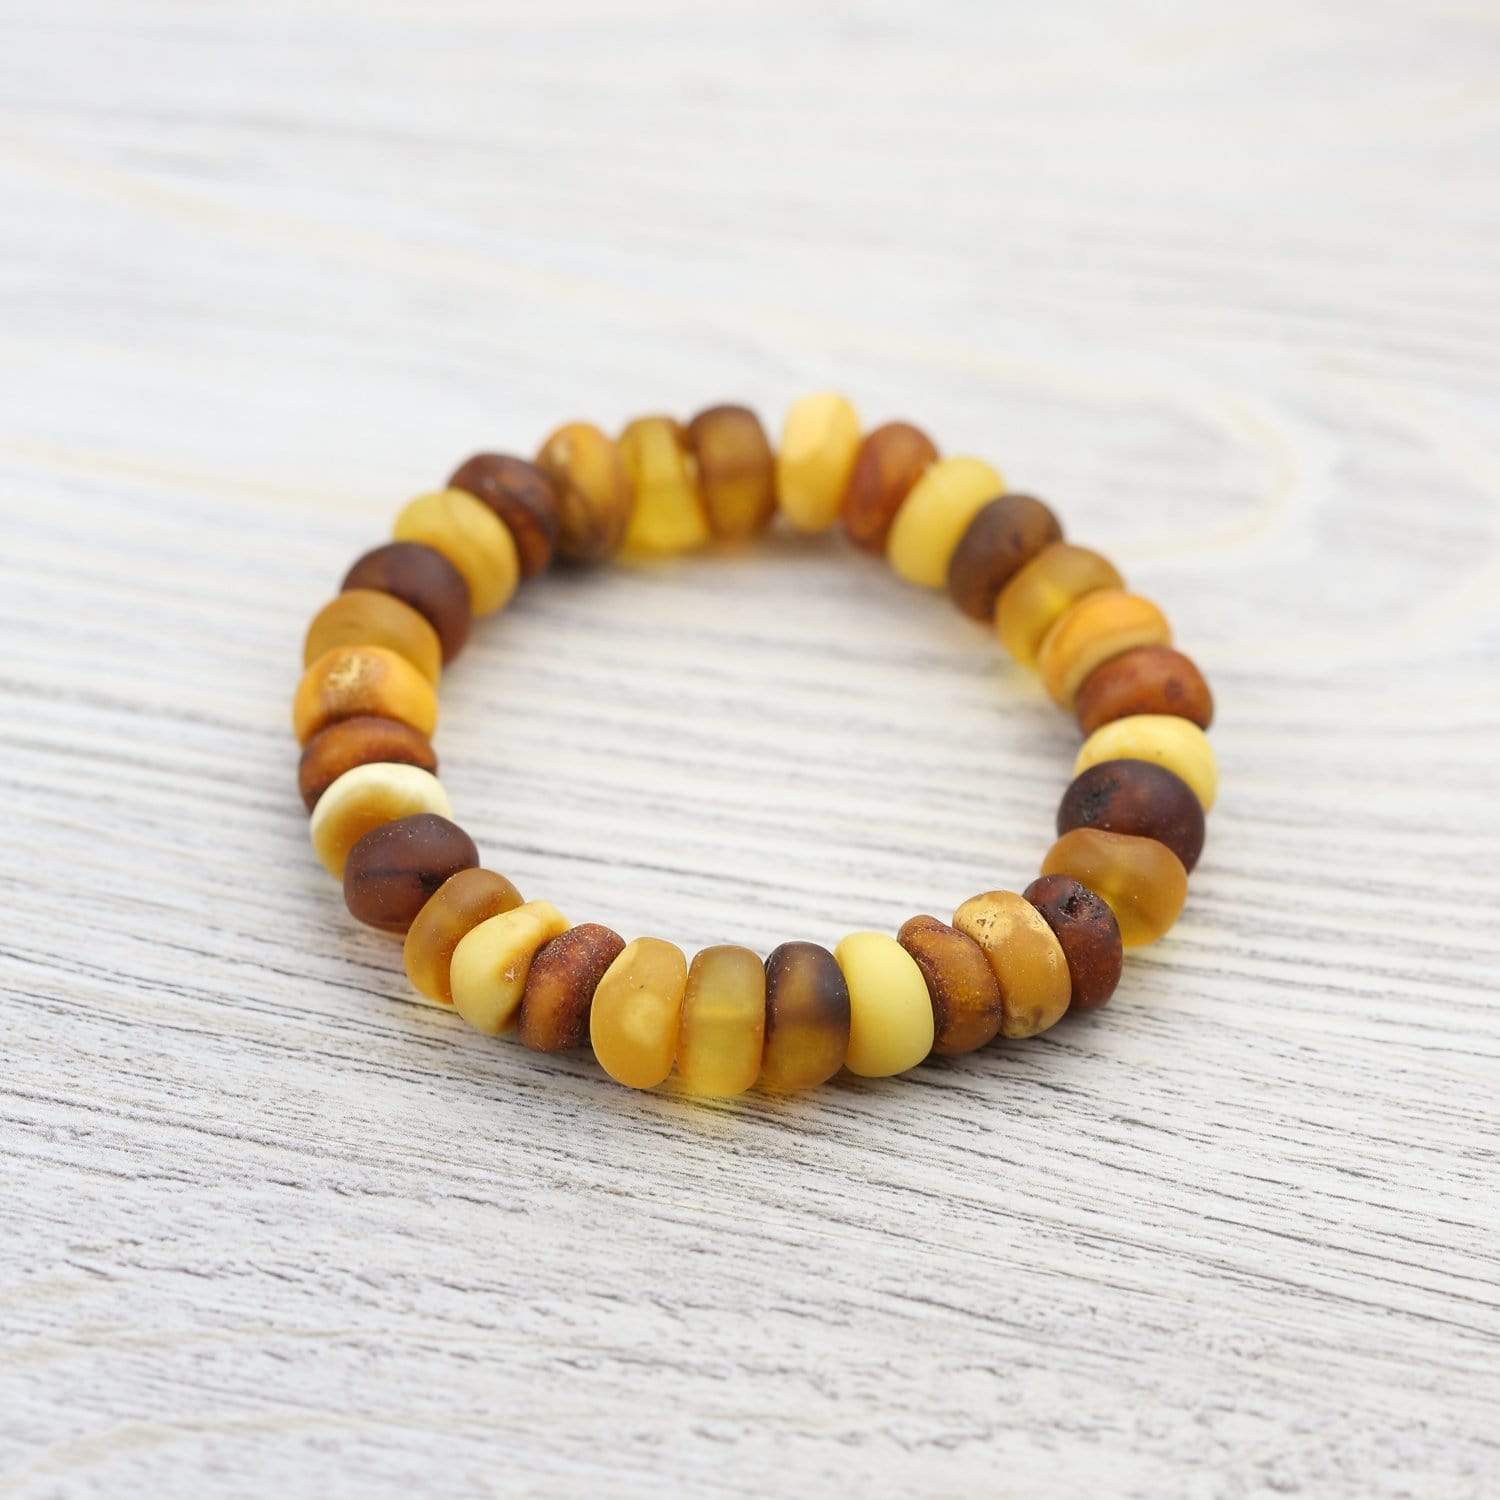 11mm Real Baltic Amber Bracelet for Adults (Women/Men), 100% Polished  Certified Natural Amber Stone, Handmade in Poland Jewelry - Newegg.com